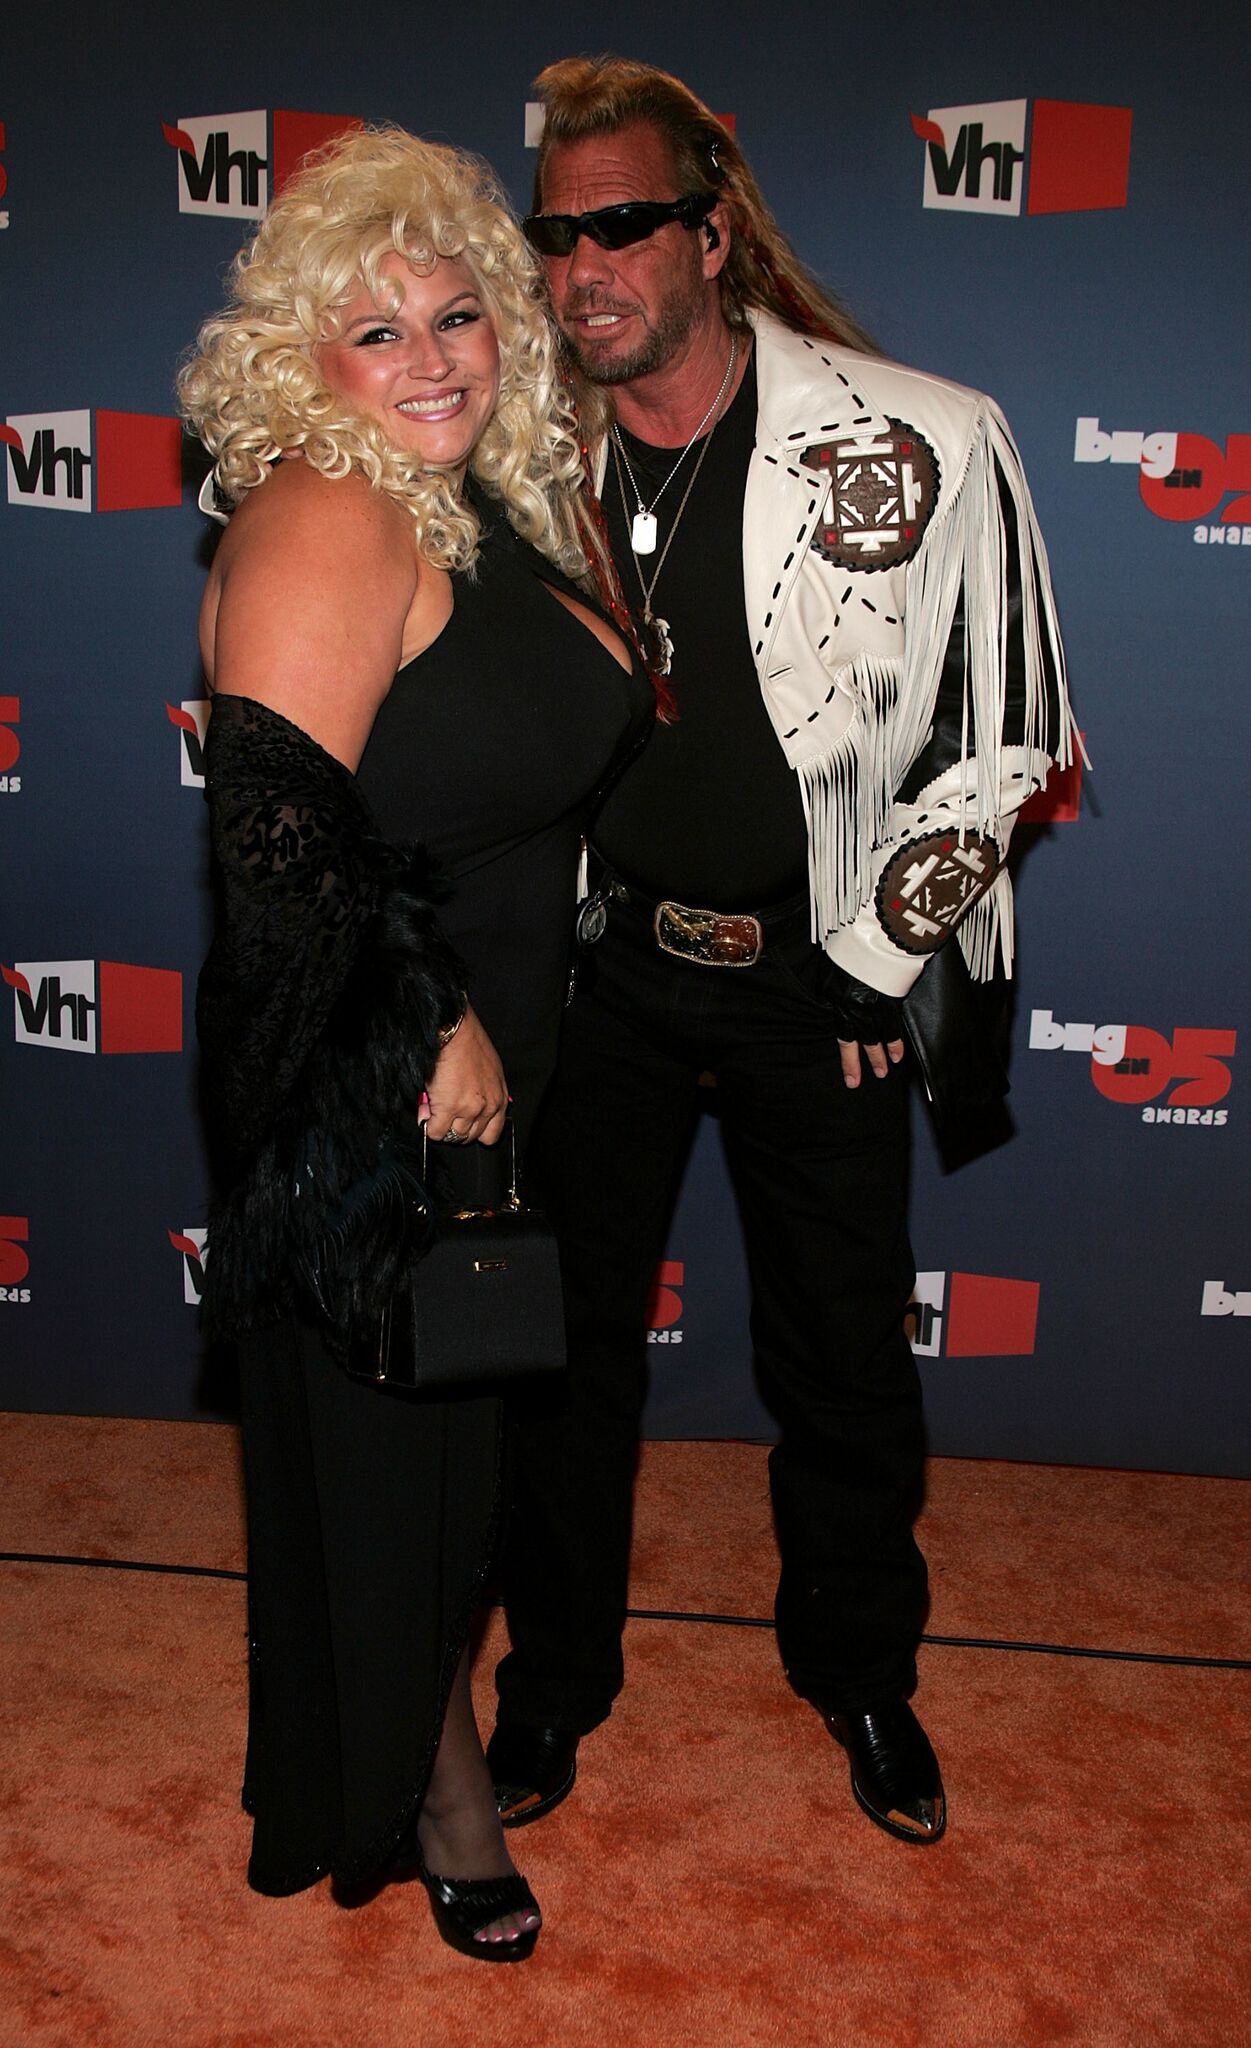 Bounty Hunter Duane "Dog" Chapman and Beth Chapman arrive at the VH1 Big In '05 Awards | Getty Images